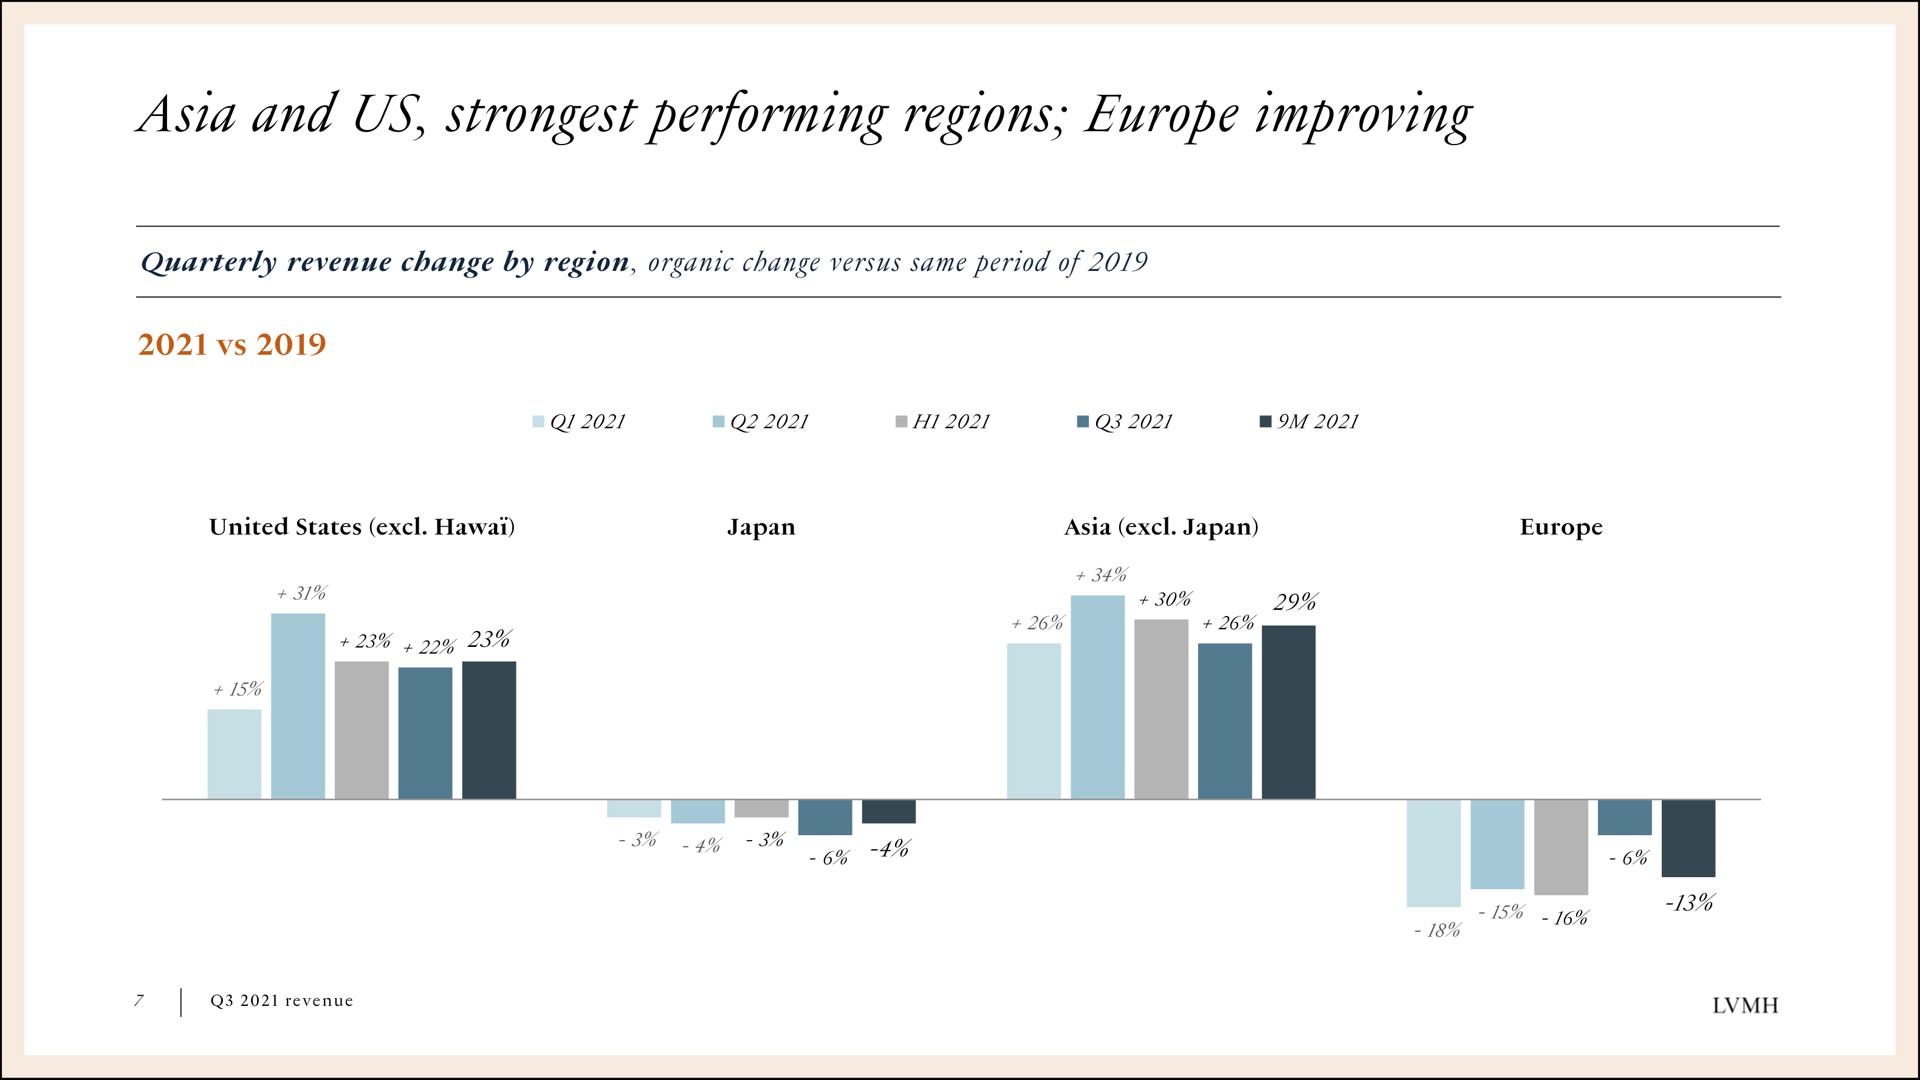 and us performing regions improving | LVMH